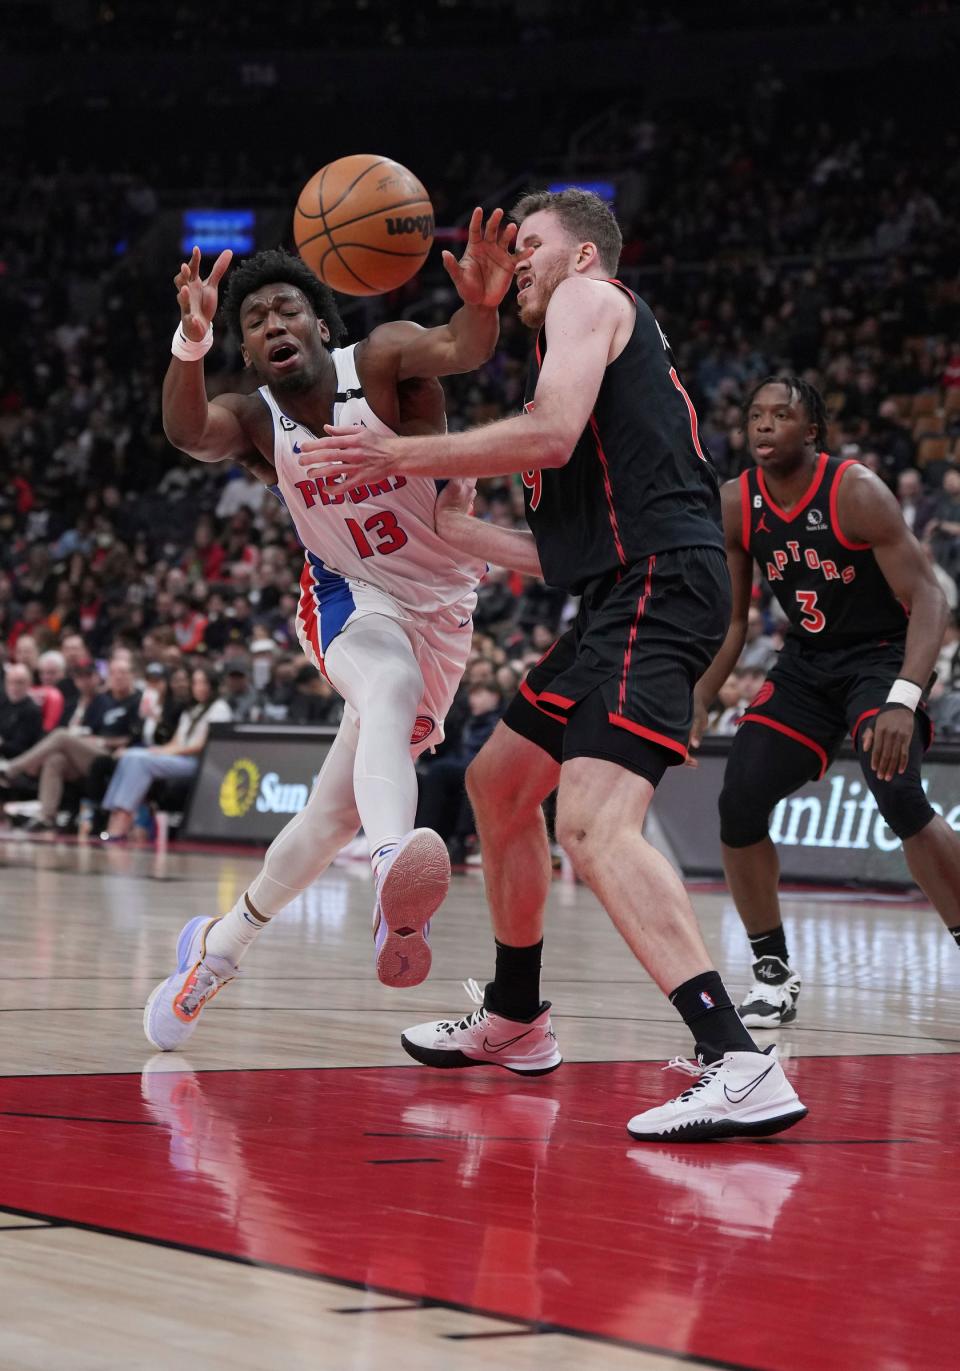 Pistons center James Wiseman battles for the ball with Raptors center Jakob Poeltl during the first quarter on Friday, March 24, 2023, in Toronto.